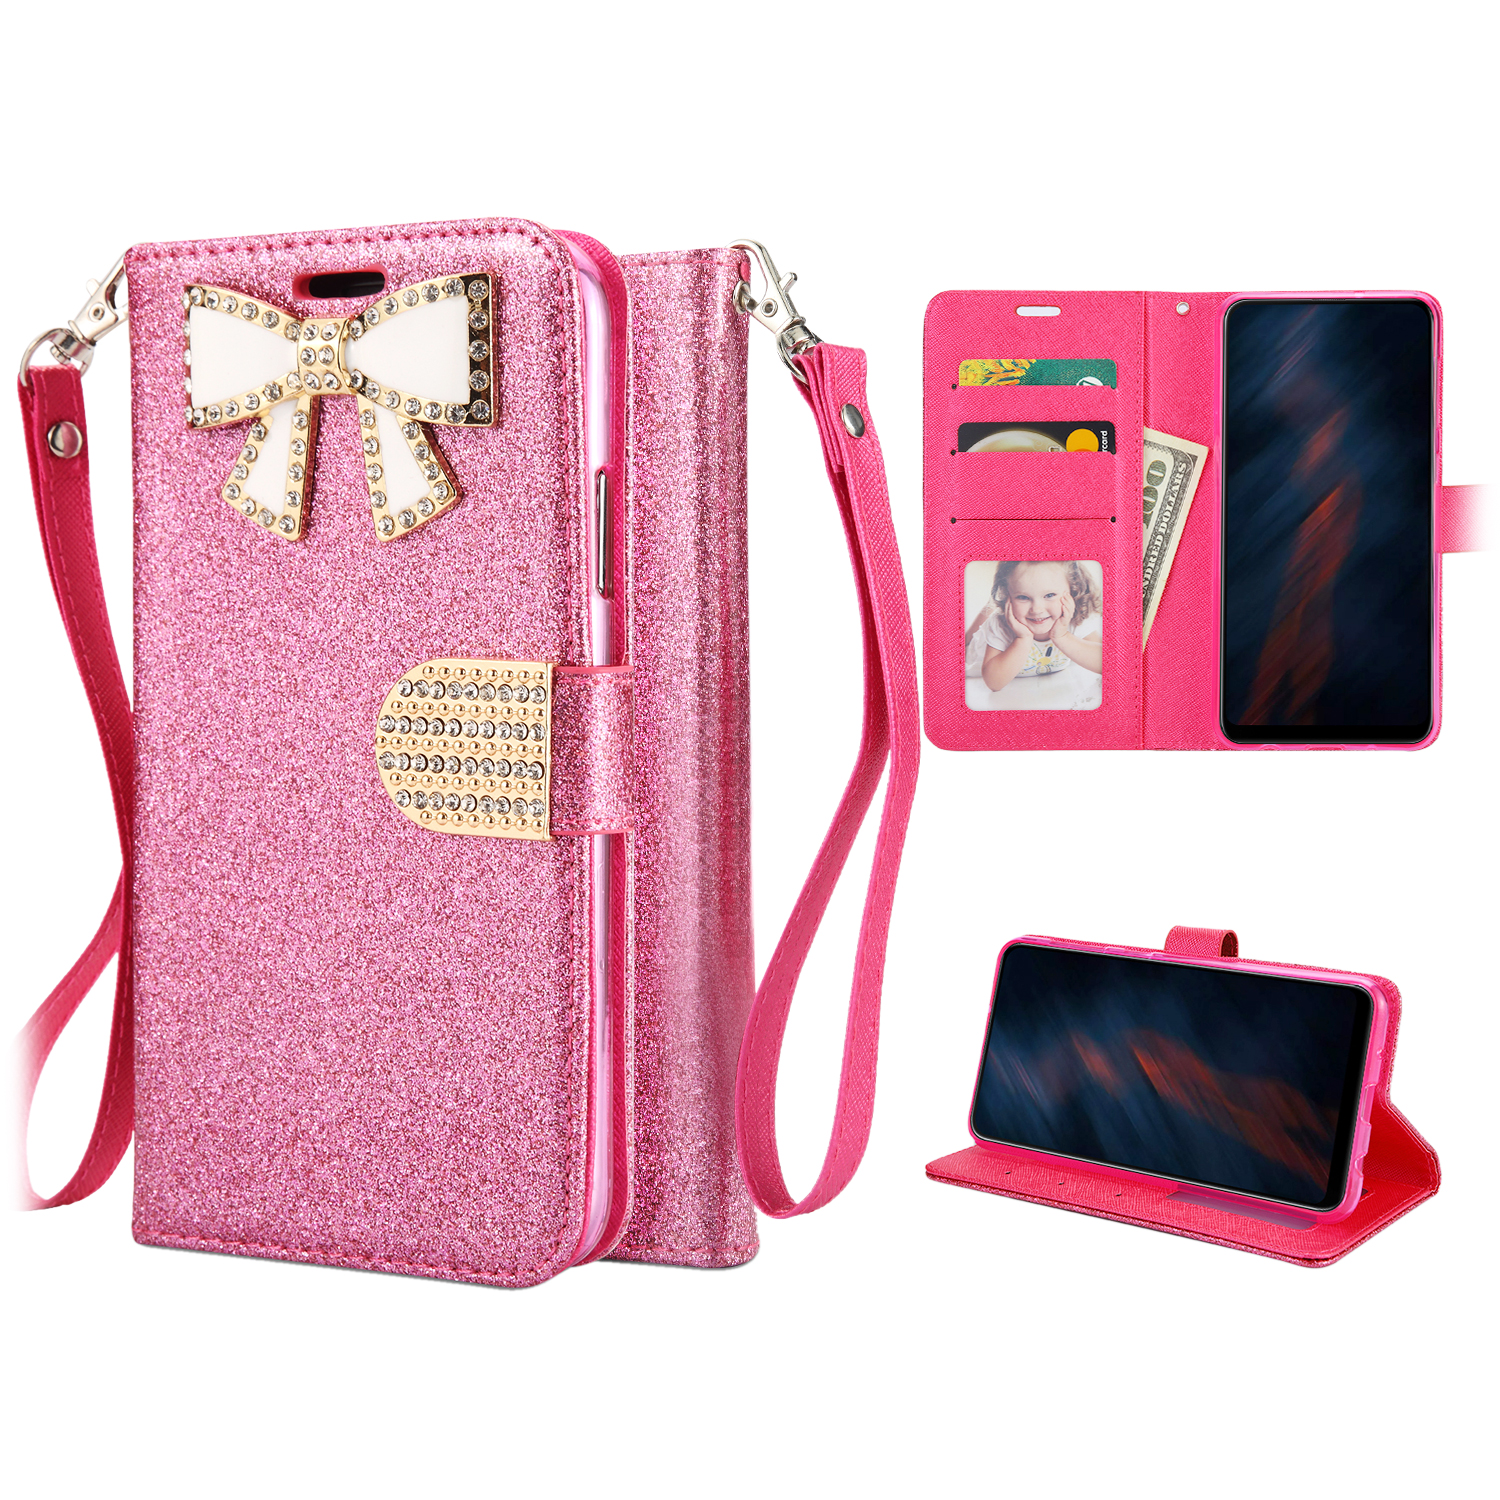 Ribbon Bow Crystal Diamond WALLET Case for Samsung Galaxy S20Plus (HotPink)